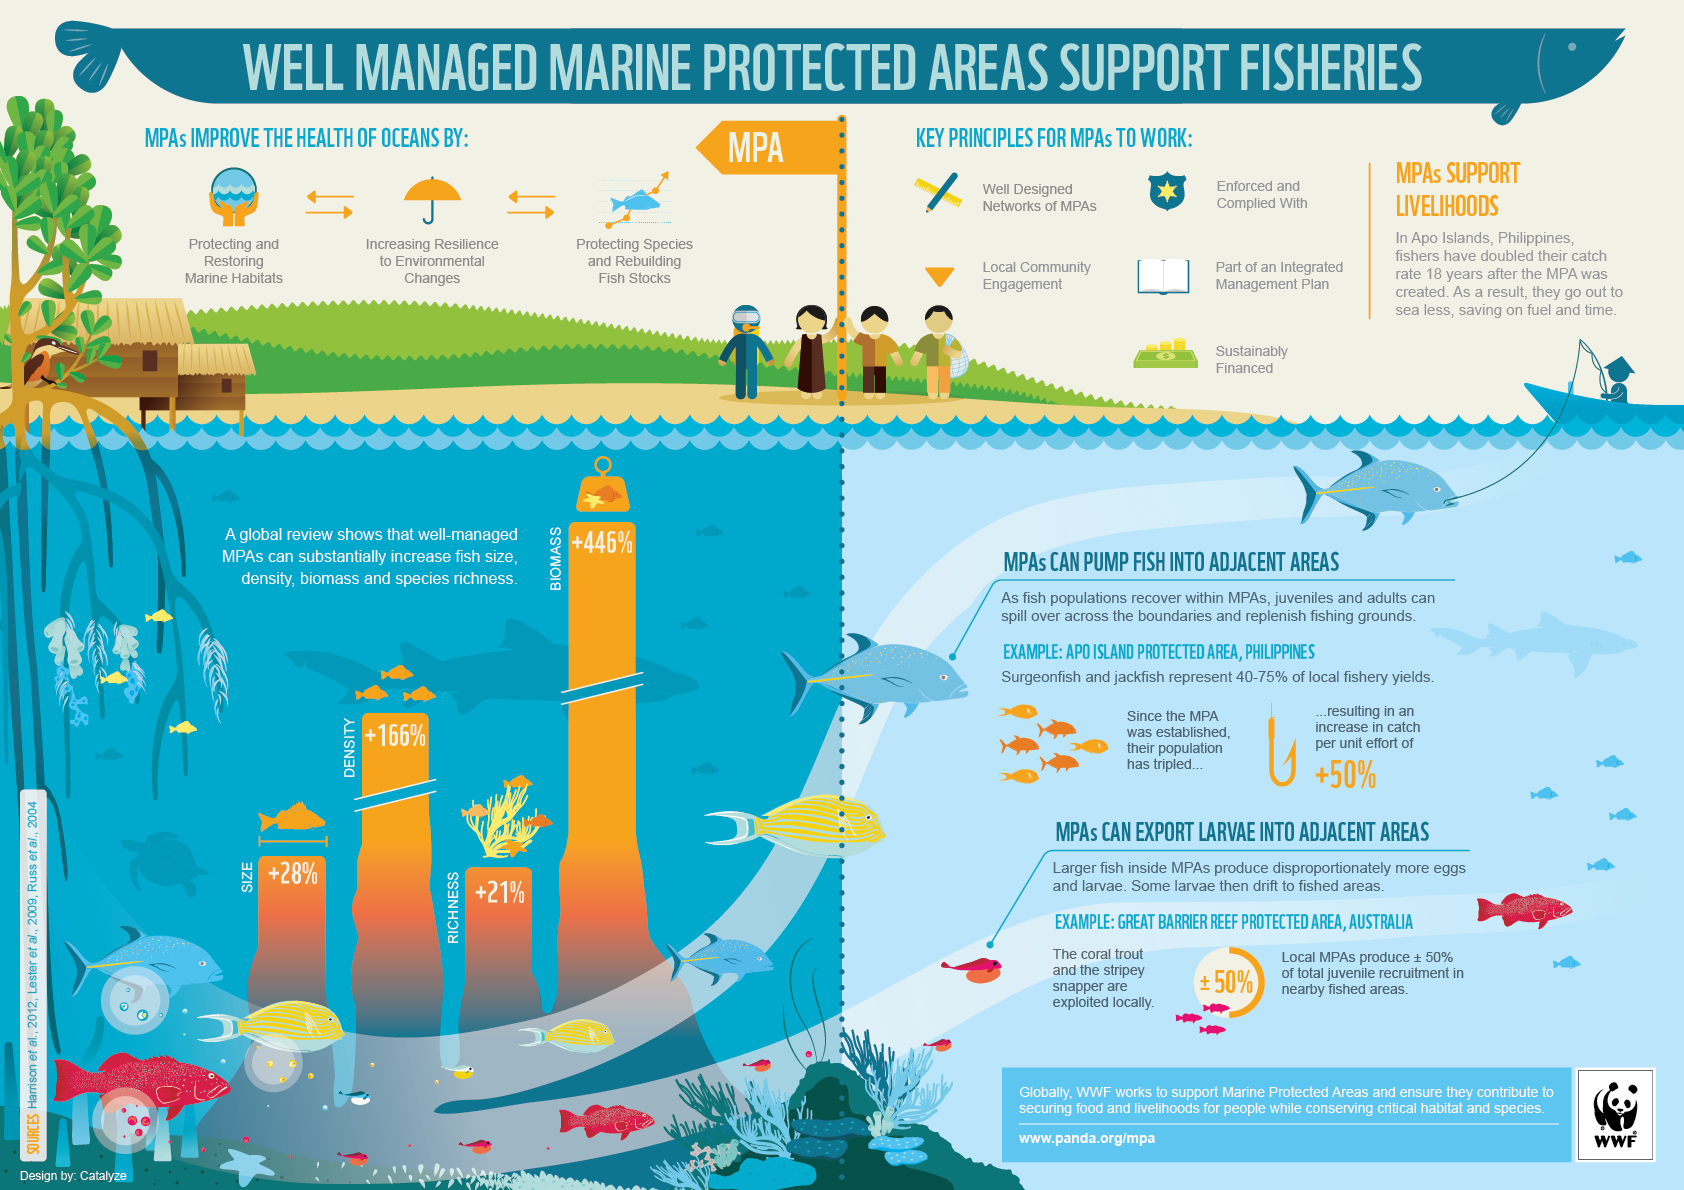 fisheries_benefits_marine_protected_areas_wwf_infographic-1